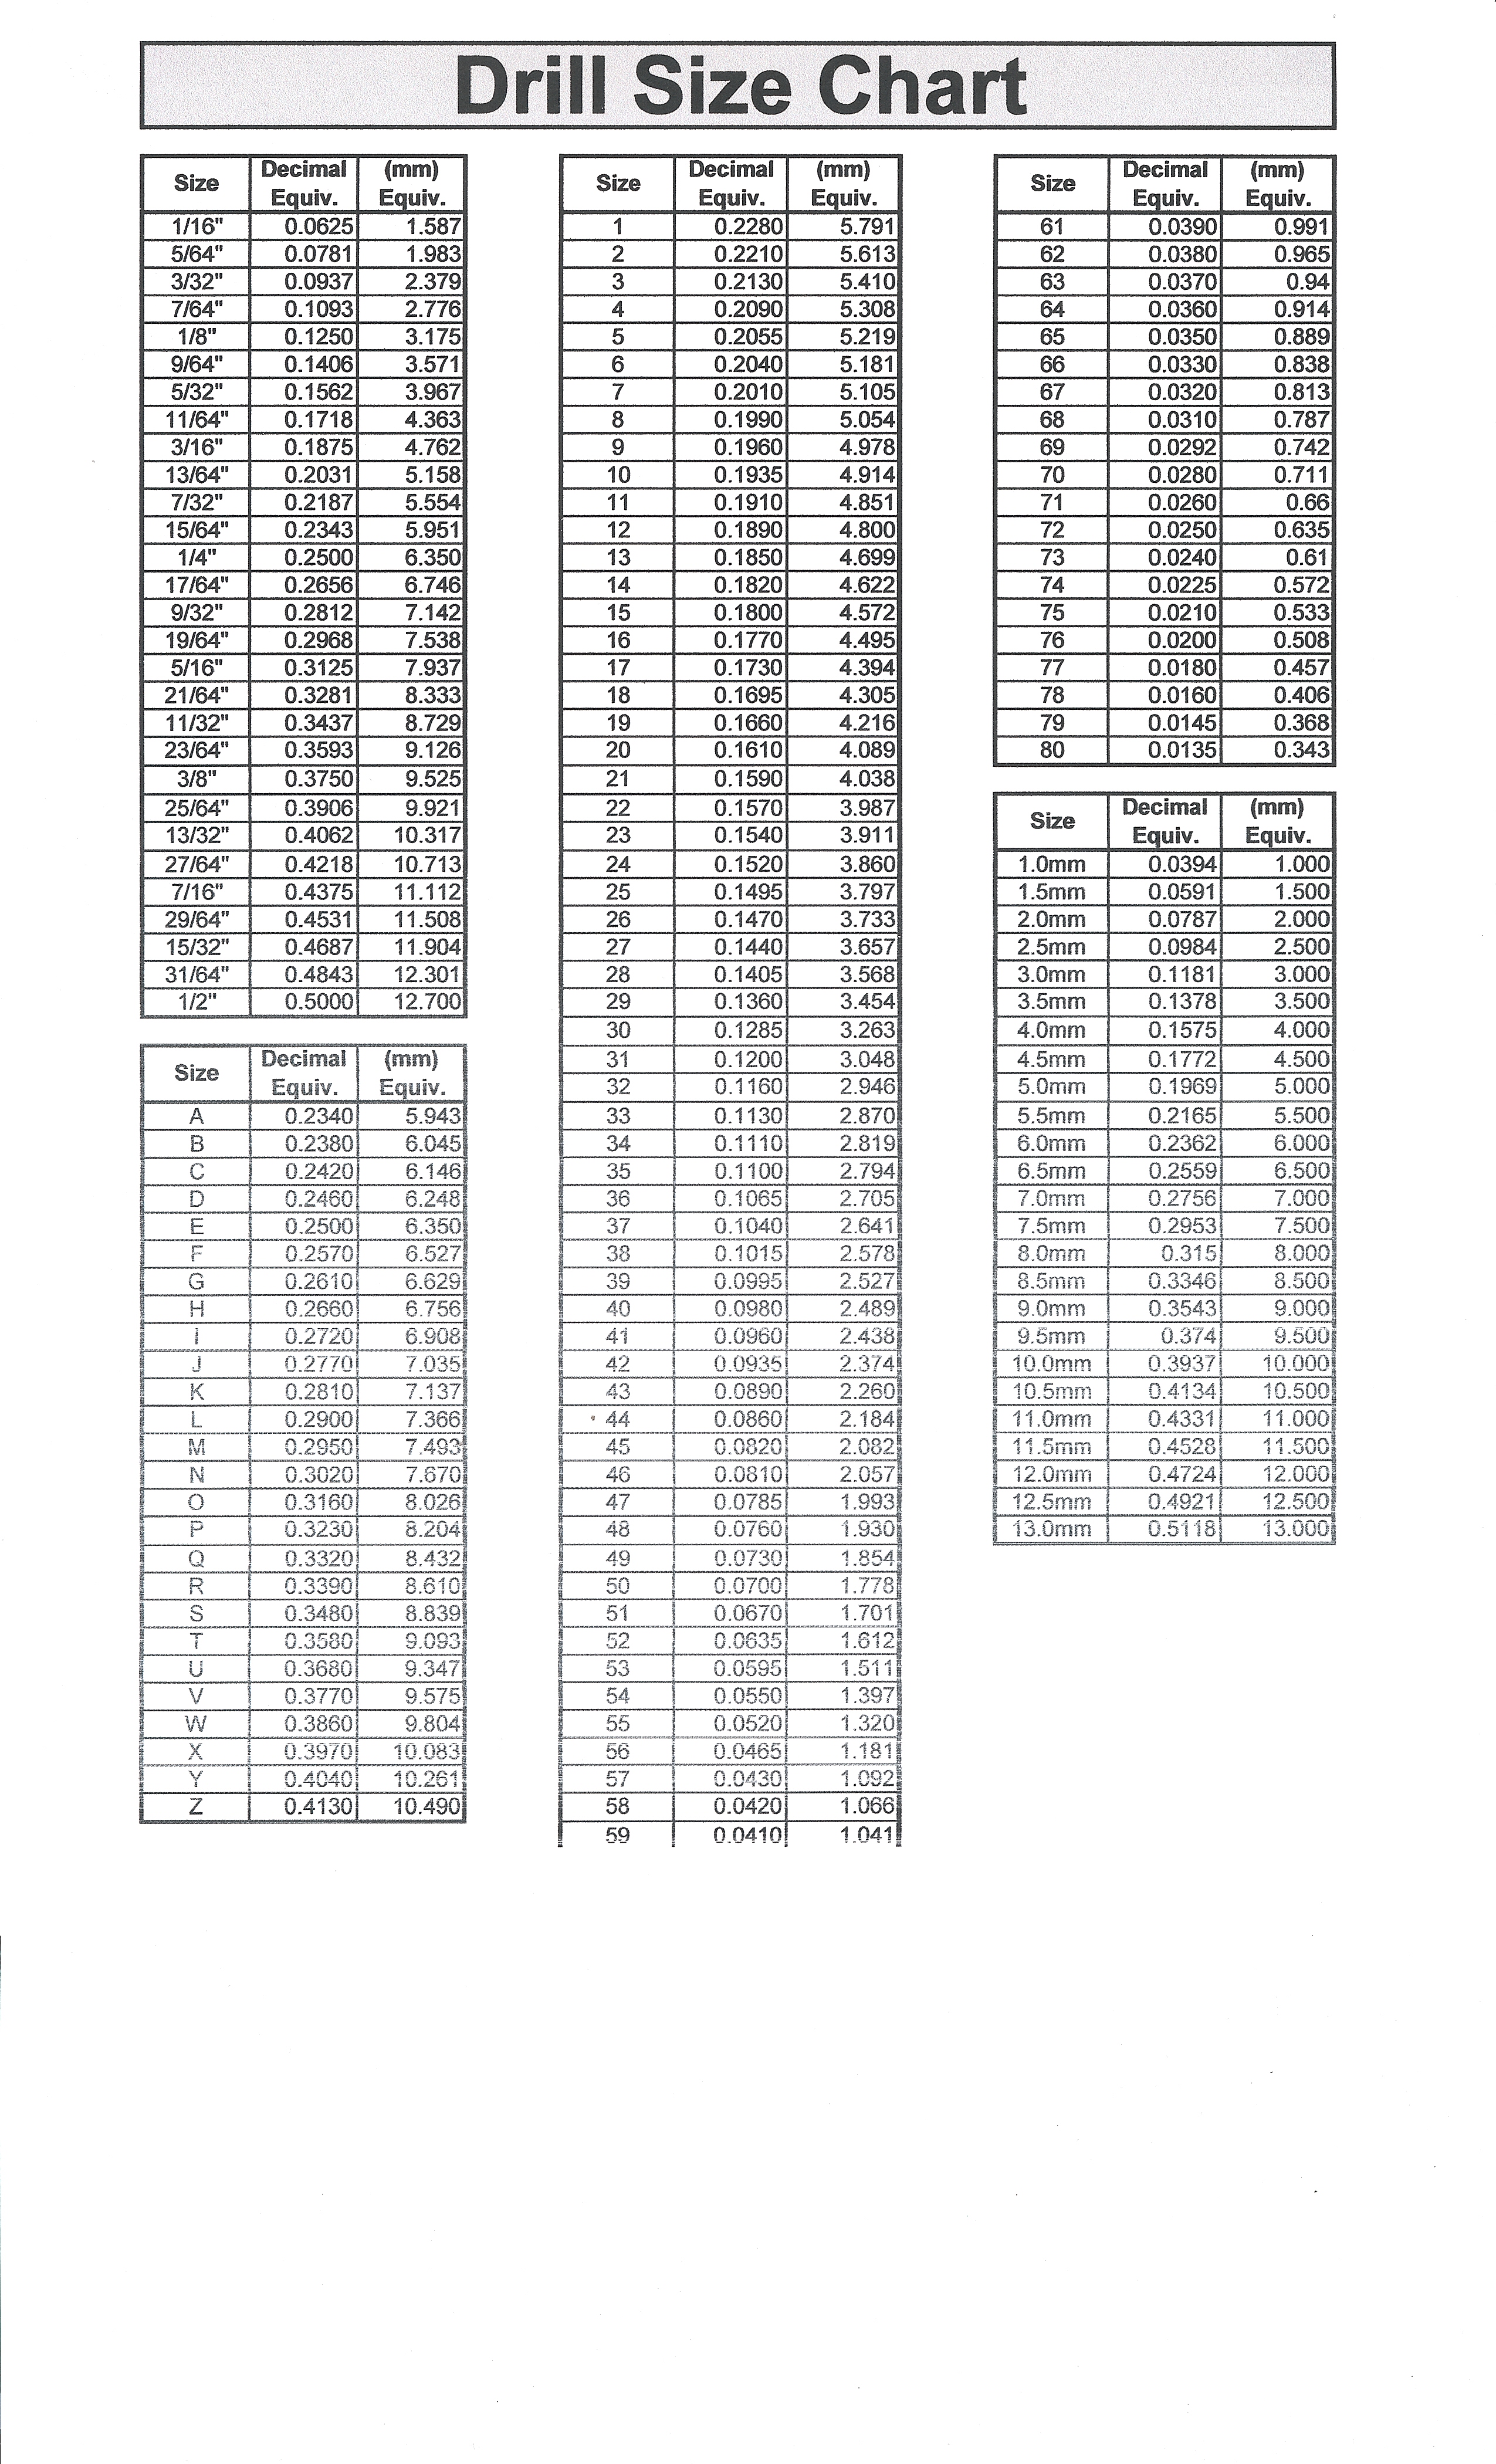 Printable Drill Size Chart amulette